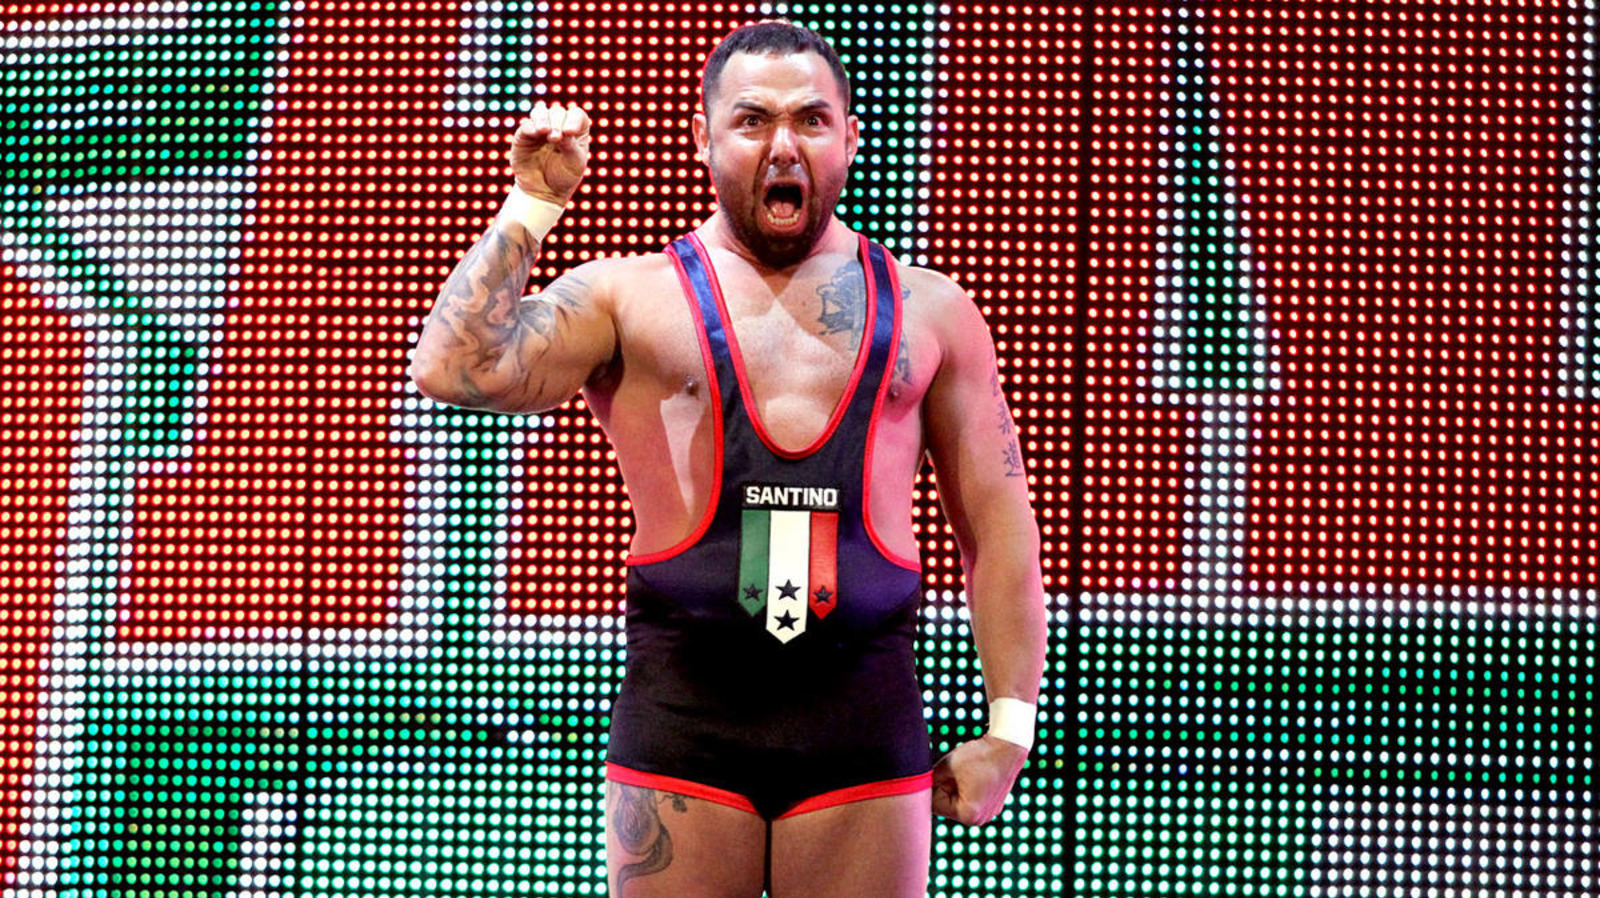 Santino Marella Reflects On Being The Quickest WWE Royal Rumble Elimination Ever